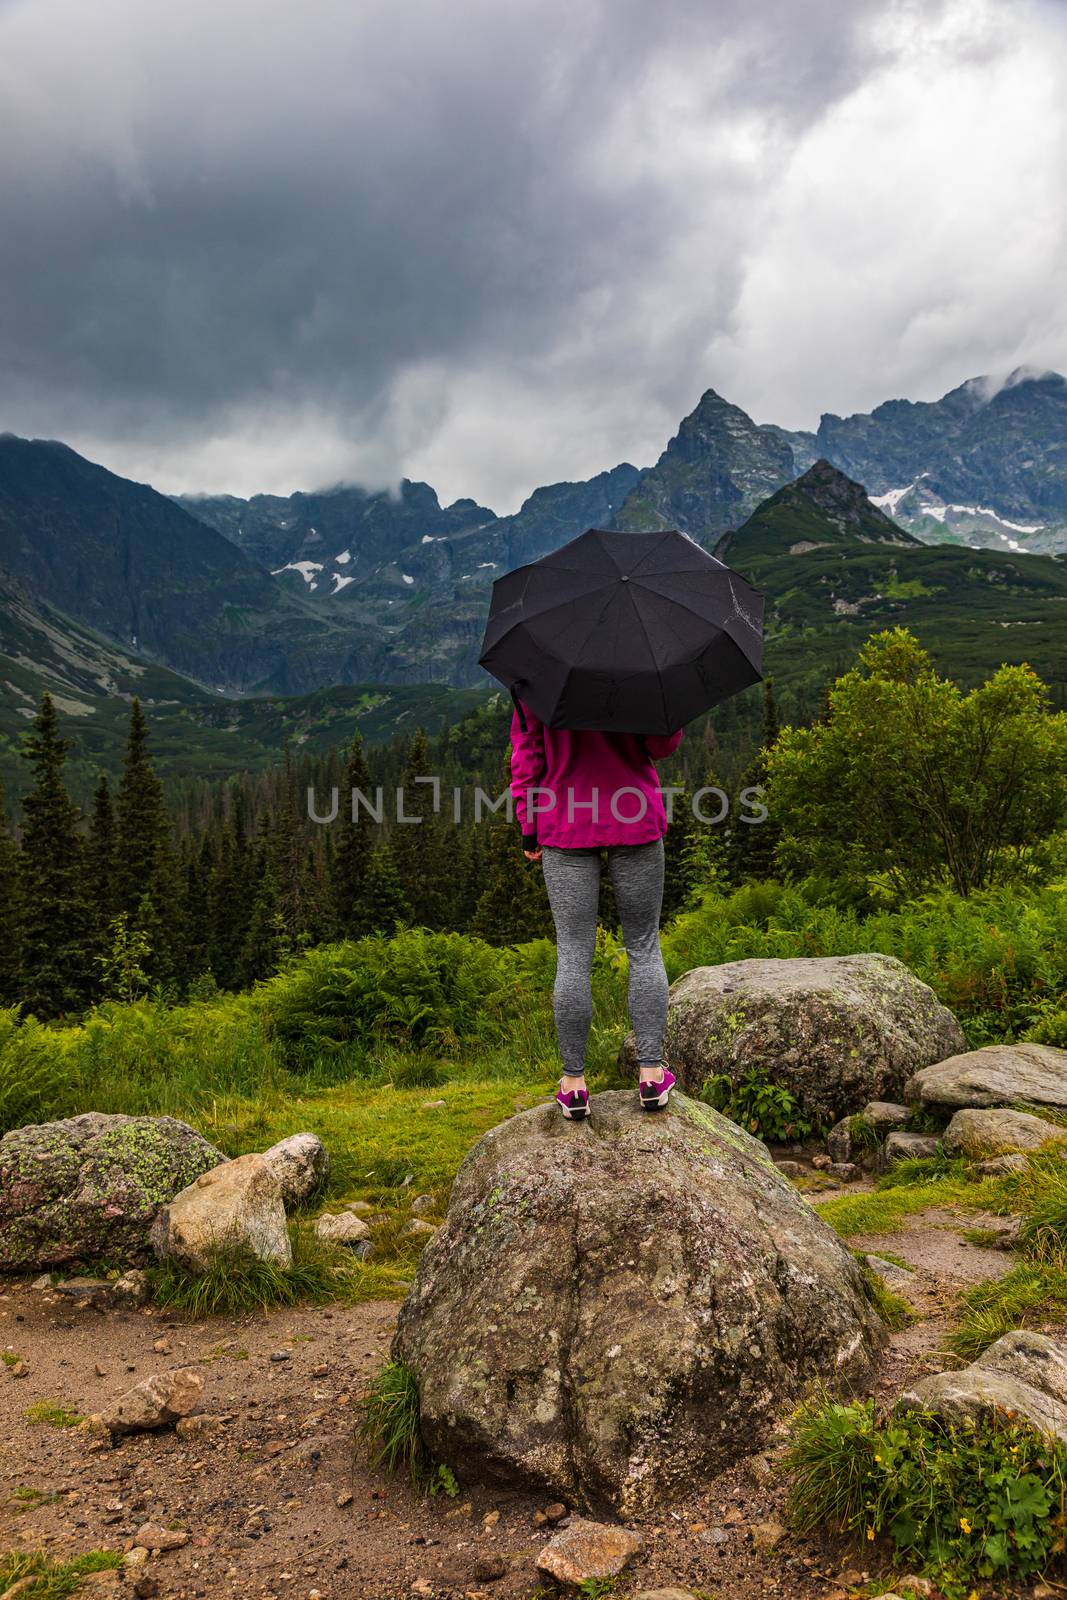 Tourist with the umbrella standing on the stone in the rain in mountain scenery